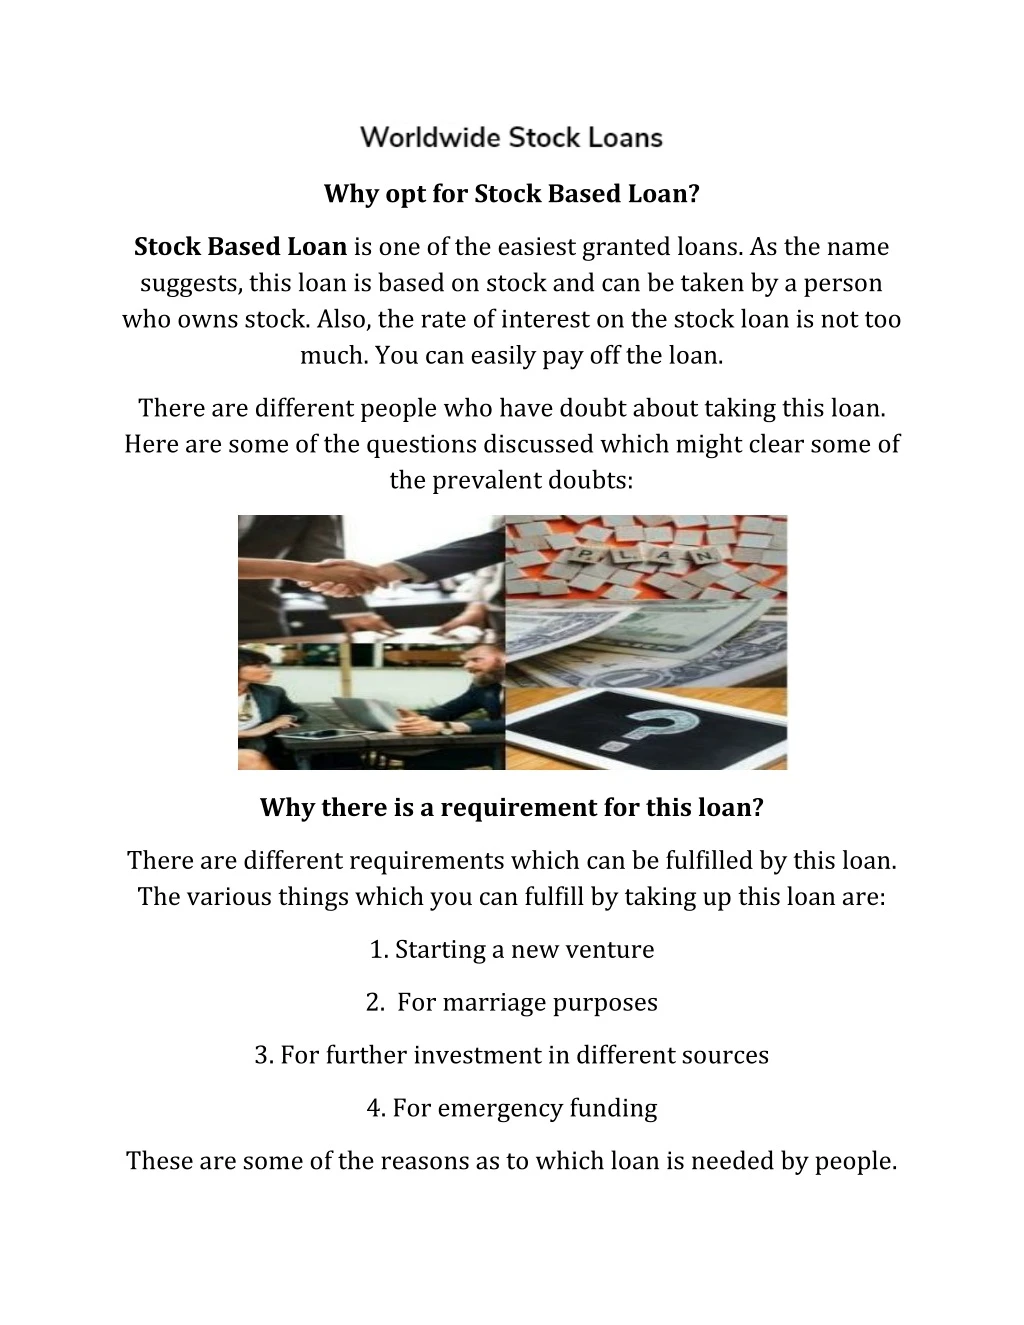 why opt for stock based loan